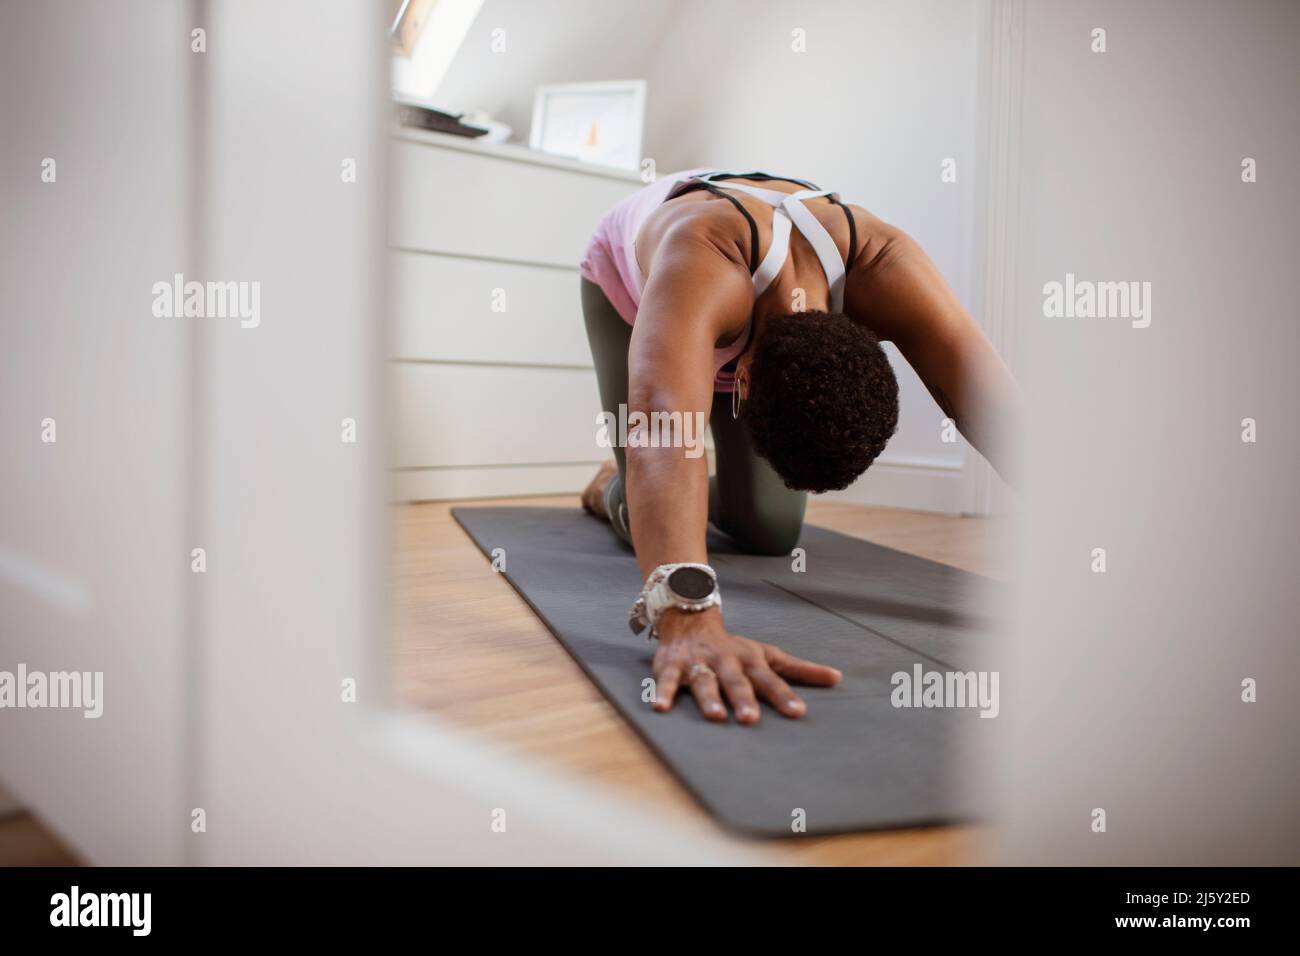 Woman practicing yoga child's pose on exercise mat Stock Photo